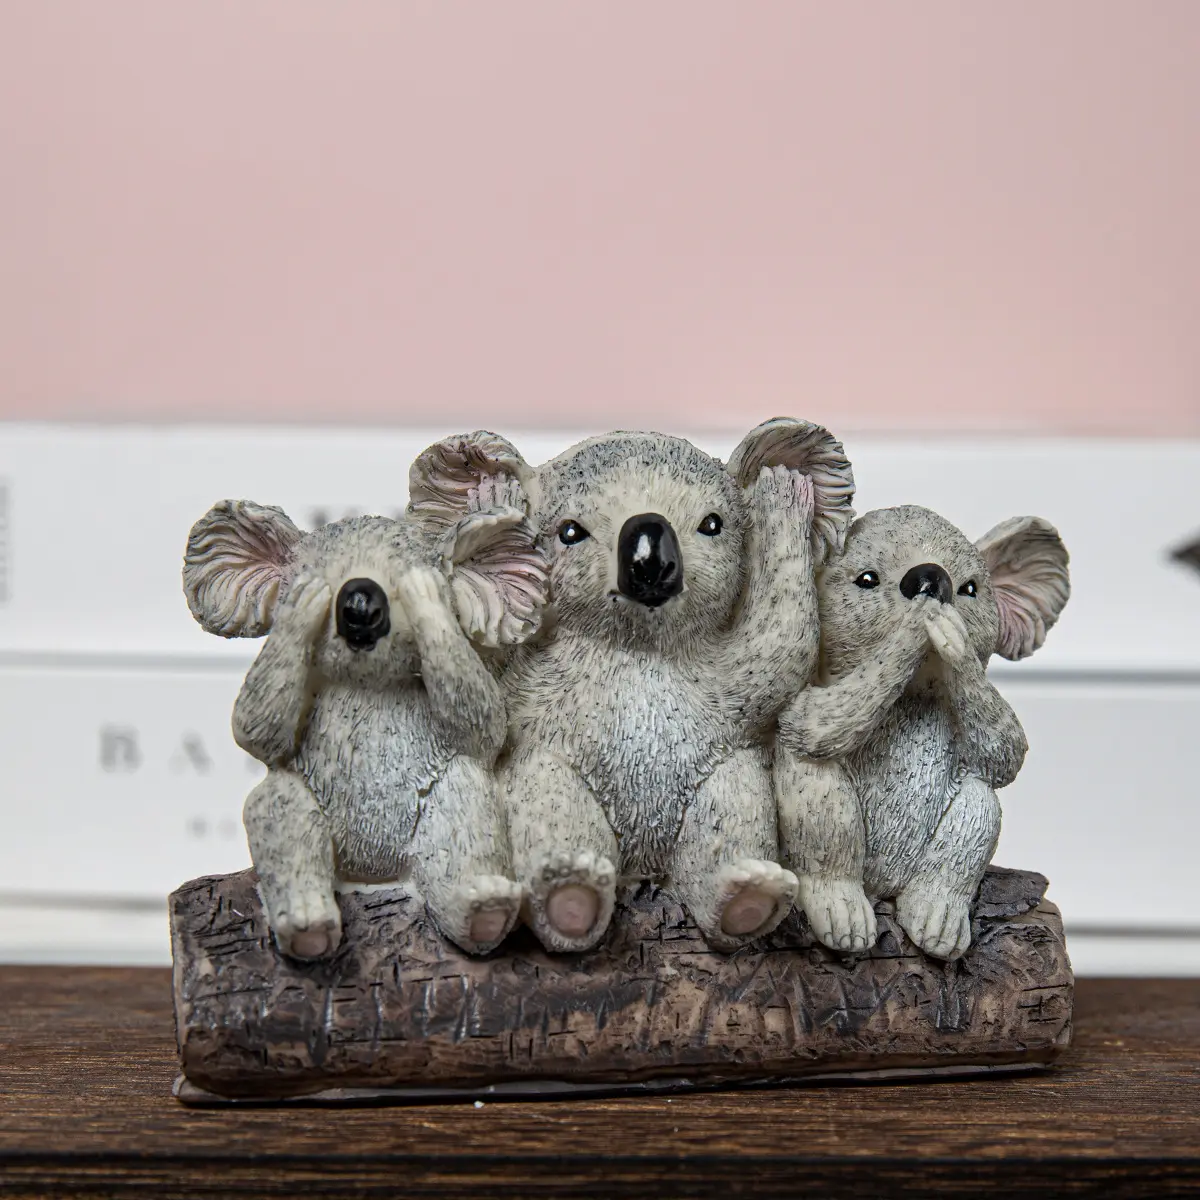 Wholesale other home decor items no see no listen no speak conjoined koala figurine resin statue table decorative accents piece